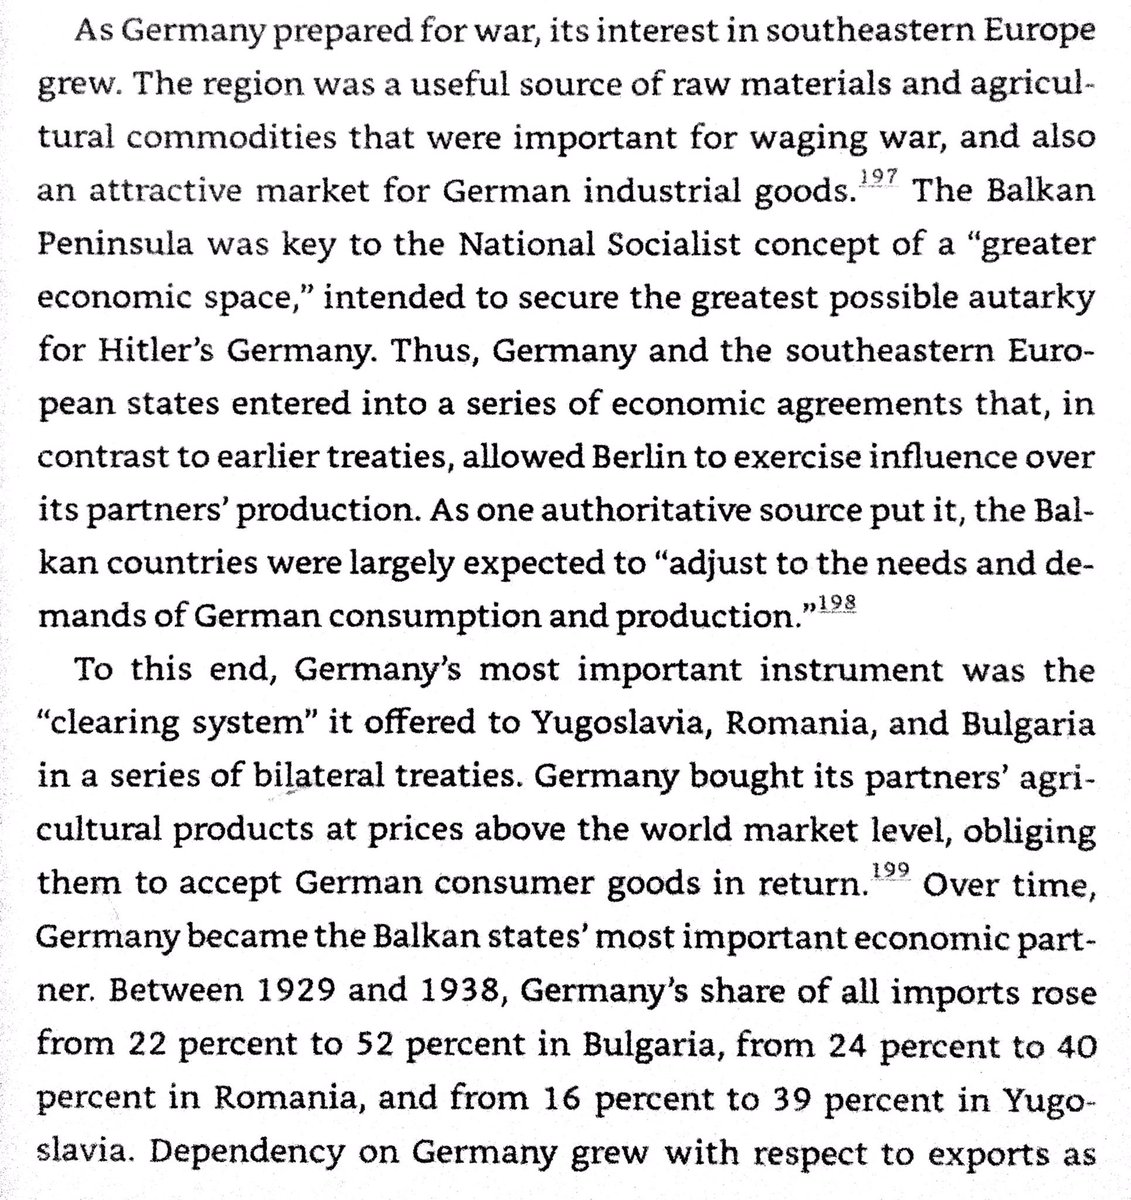 Interwar Germany’s economic relations with the Balkans: Germany could influence domestic production & require purchase of German consumer goods in exchange for overpriced raw materials & food. Germany grew to dominate trade with all Balkan states other than Albania.